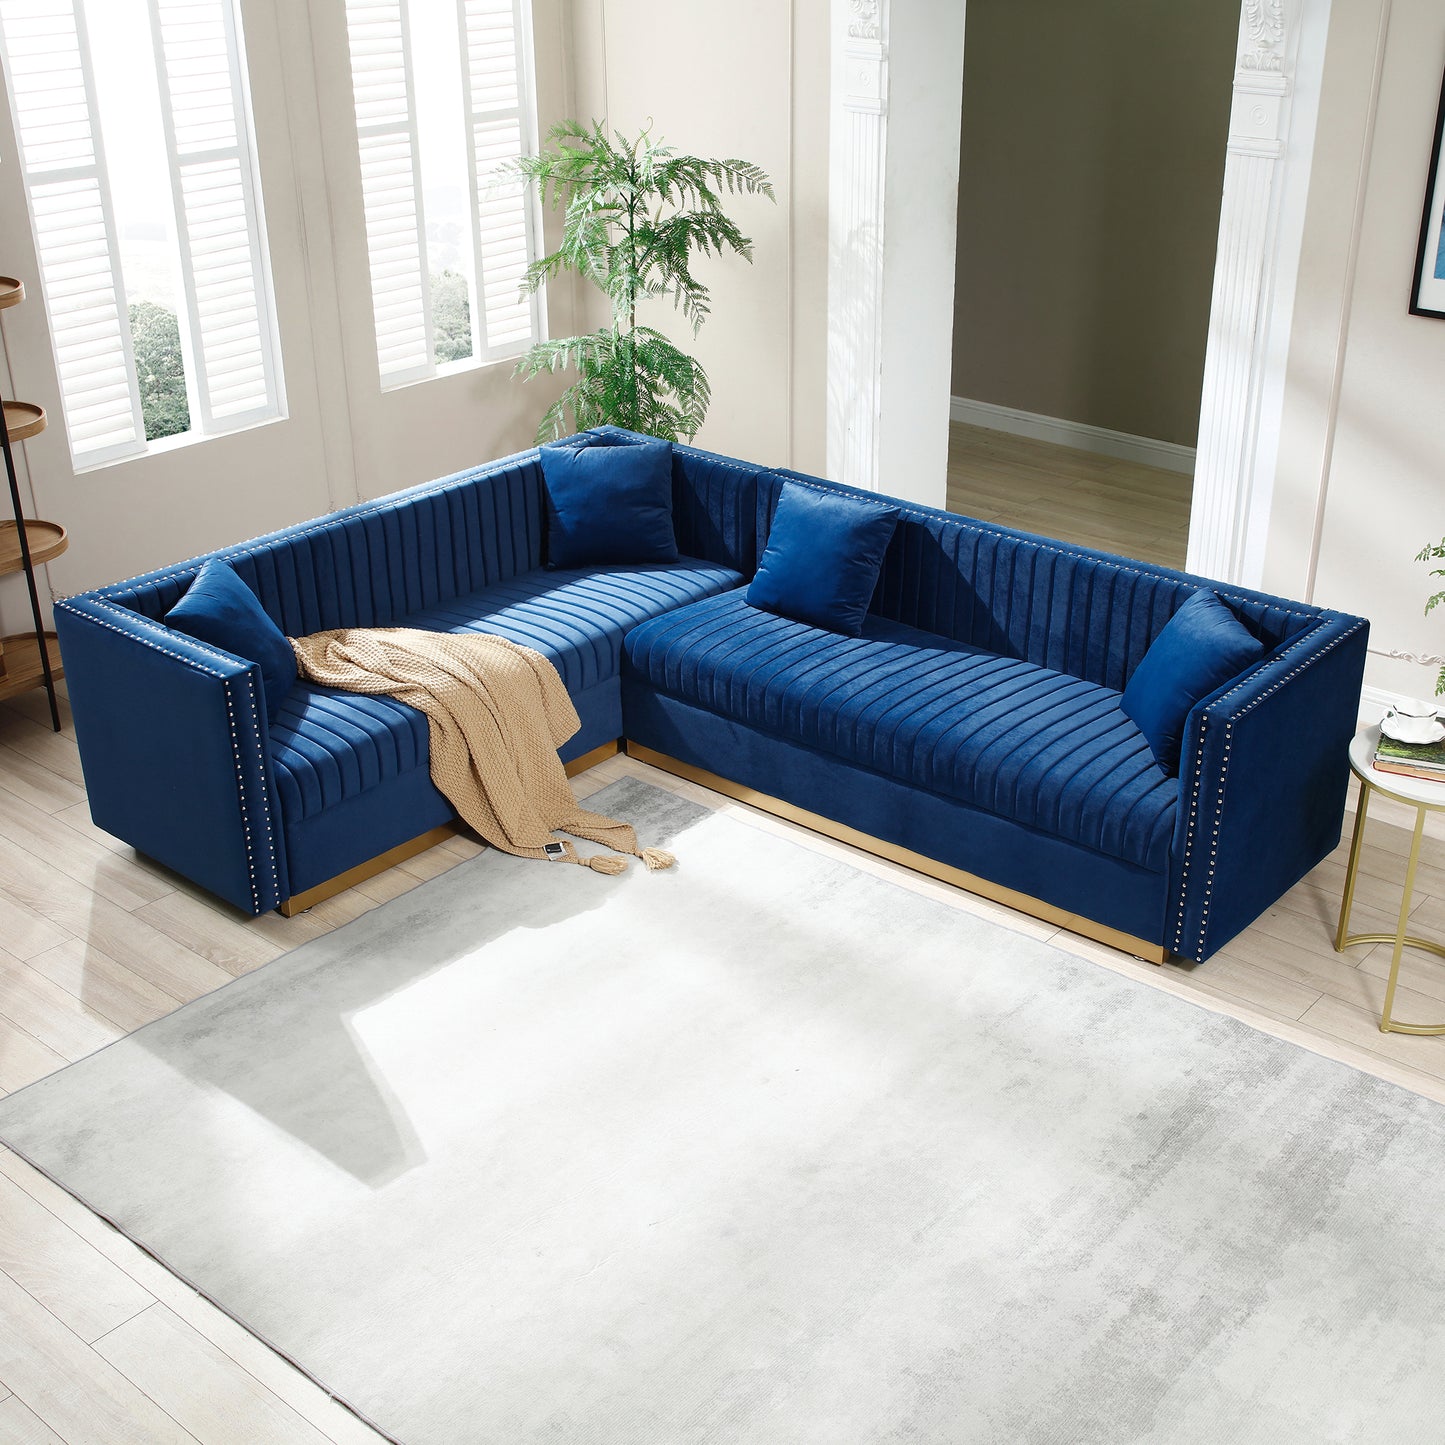 Contemporary Vertical Channel Tufted Velvet Sectional Sofa Modern Upholstered Corner Couch for Living Room Apartment with 4 pillows,Blue